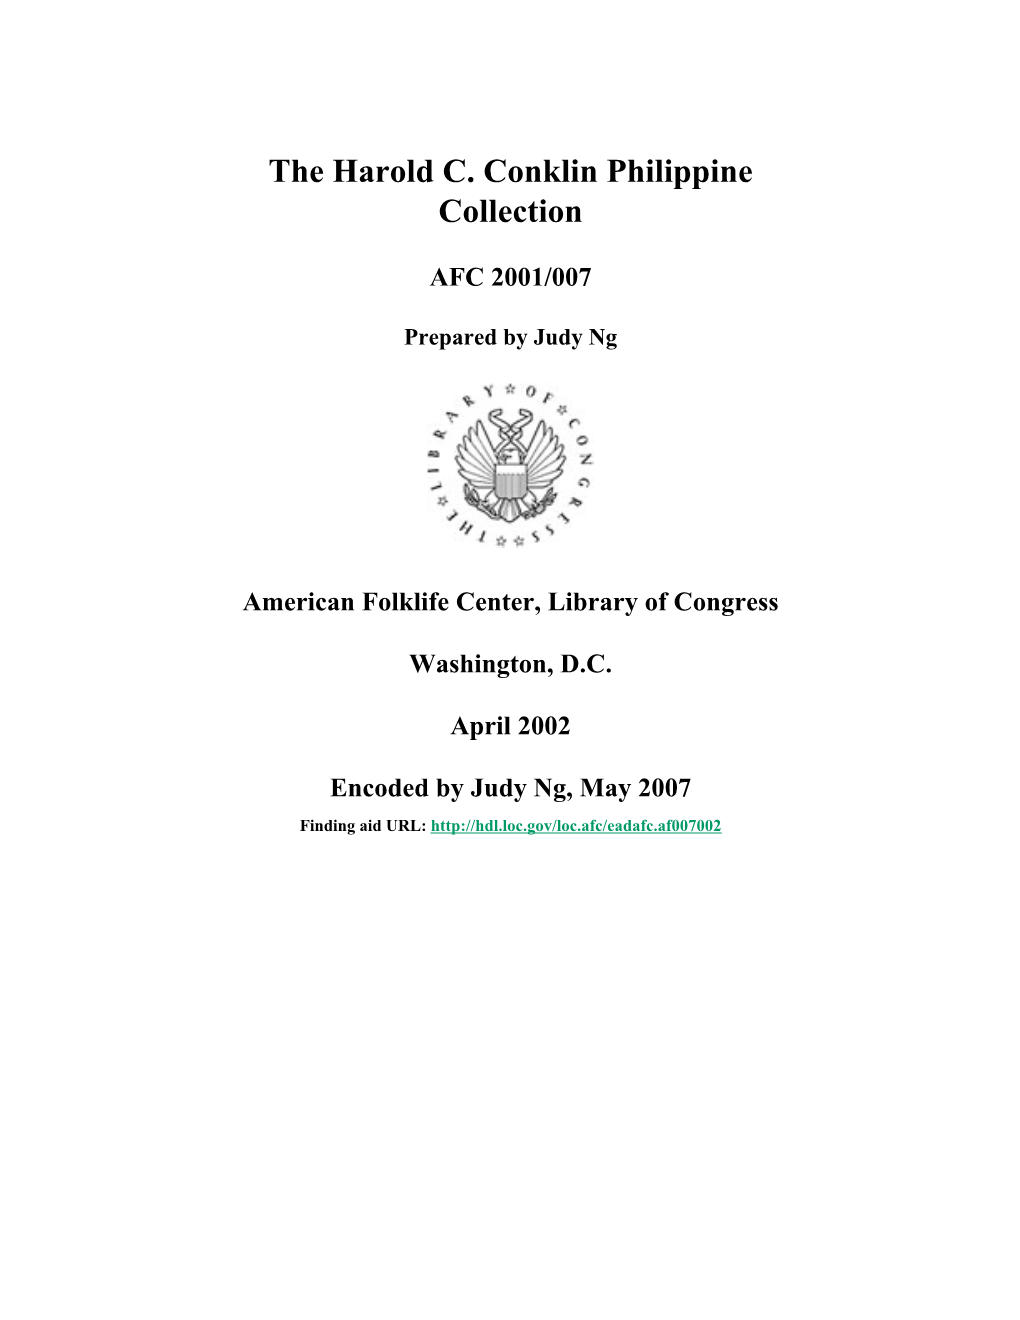 The Harold C. Conklin Philippine Collection